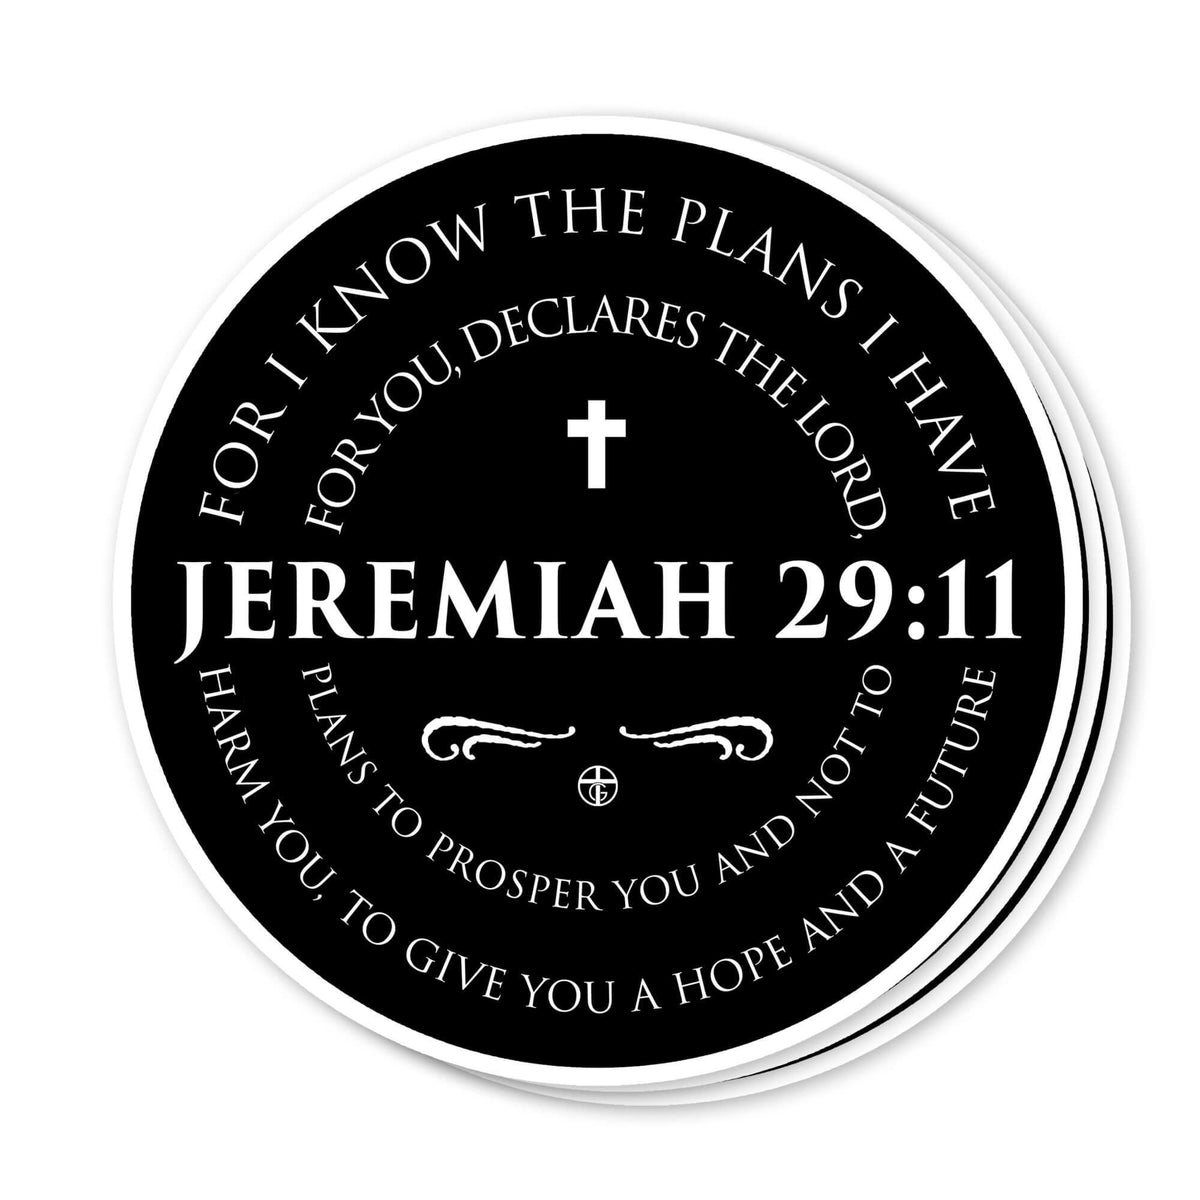 Jeremiah 29:11 Decals - Our True God